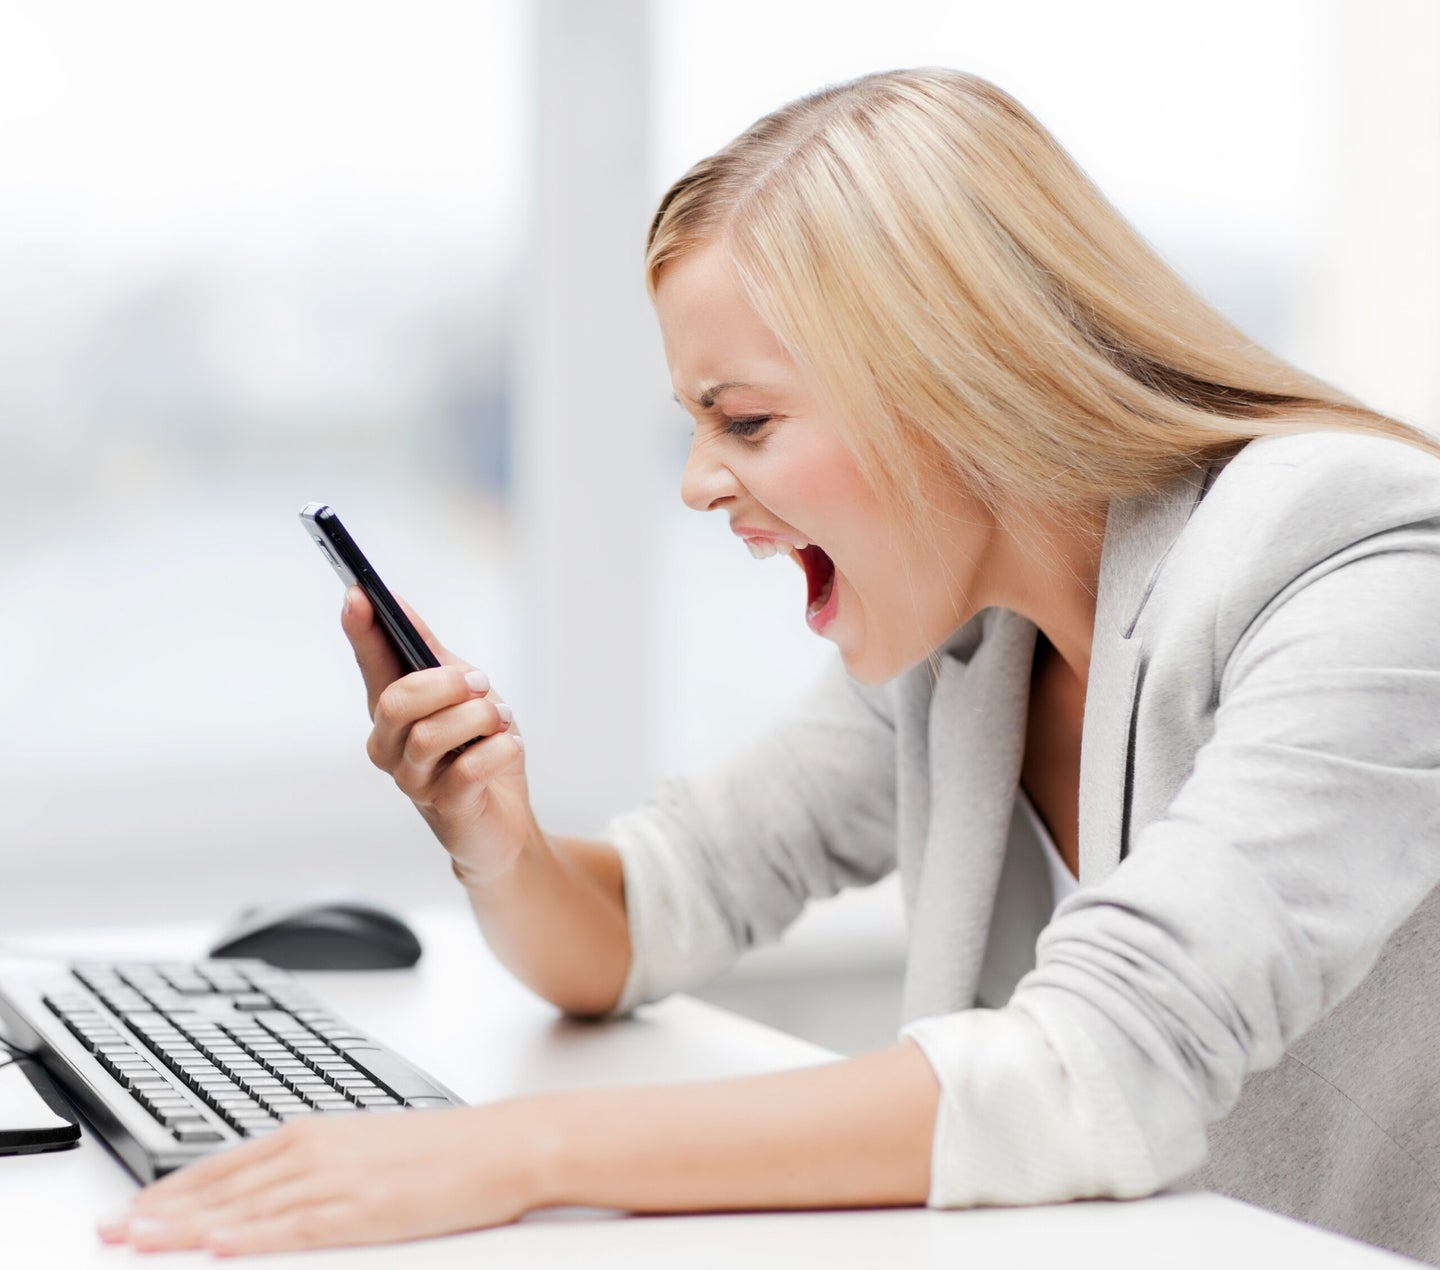 picture of angry woman shouting at phone